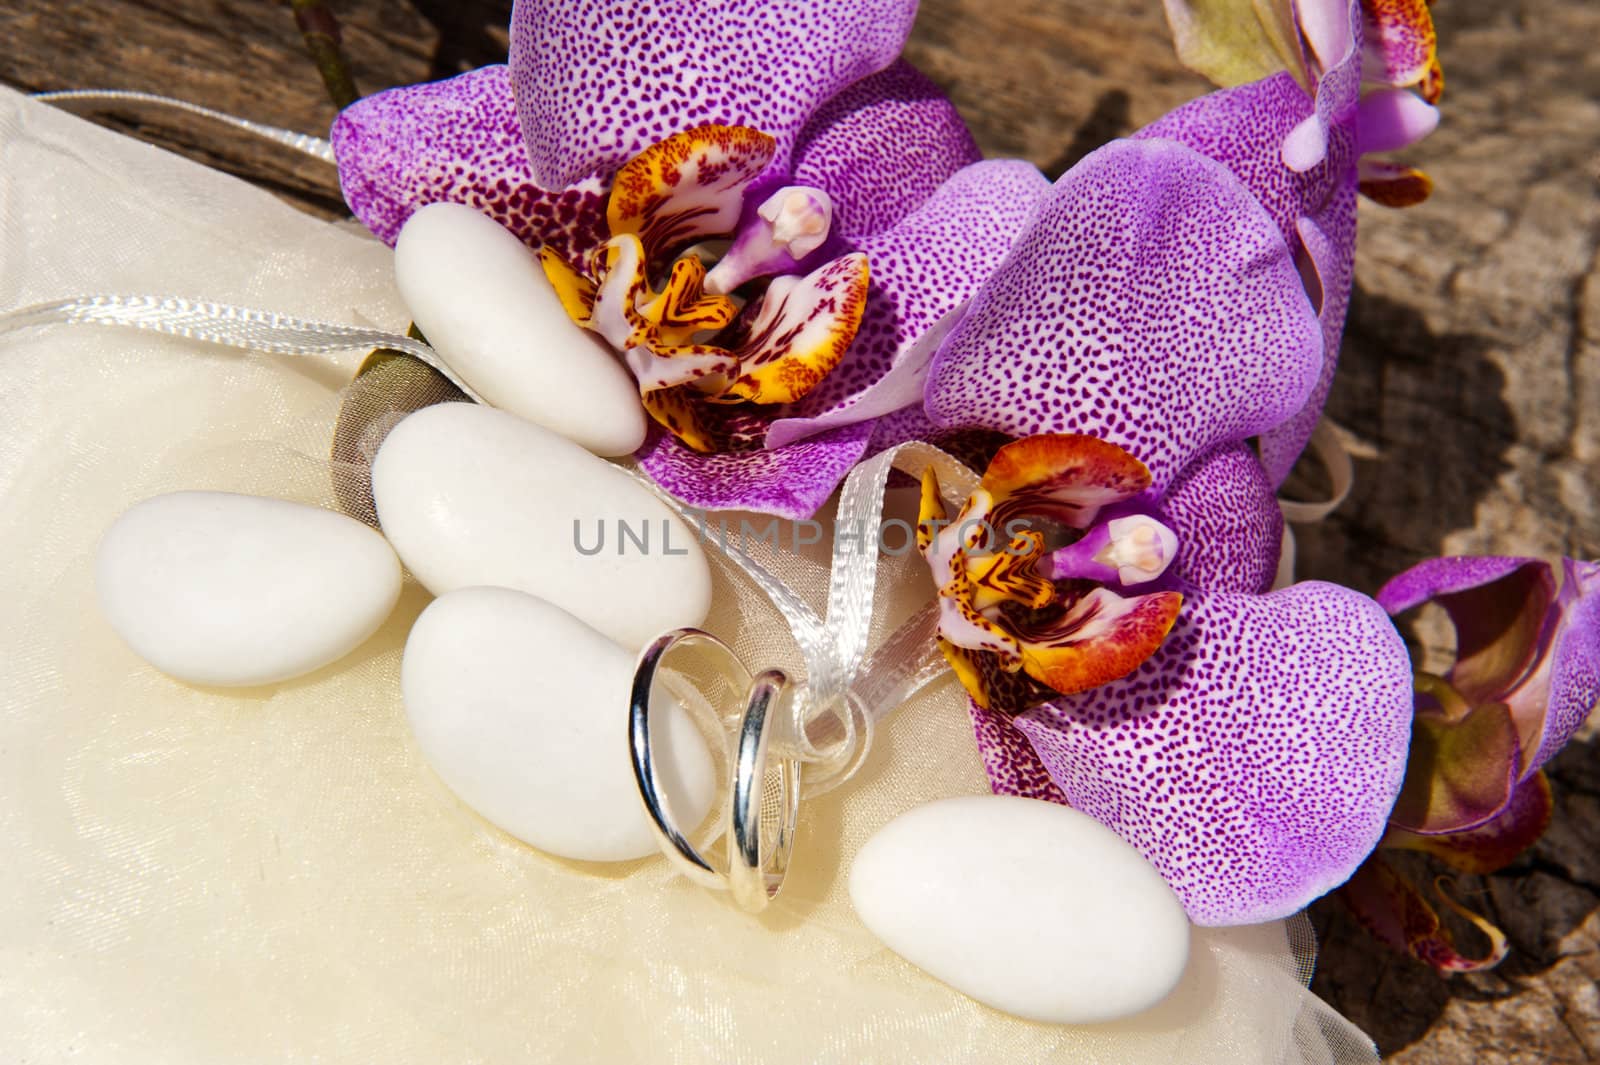 orchid and wedding rings  by carla720